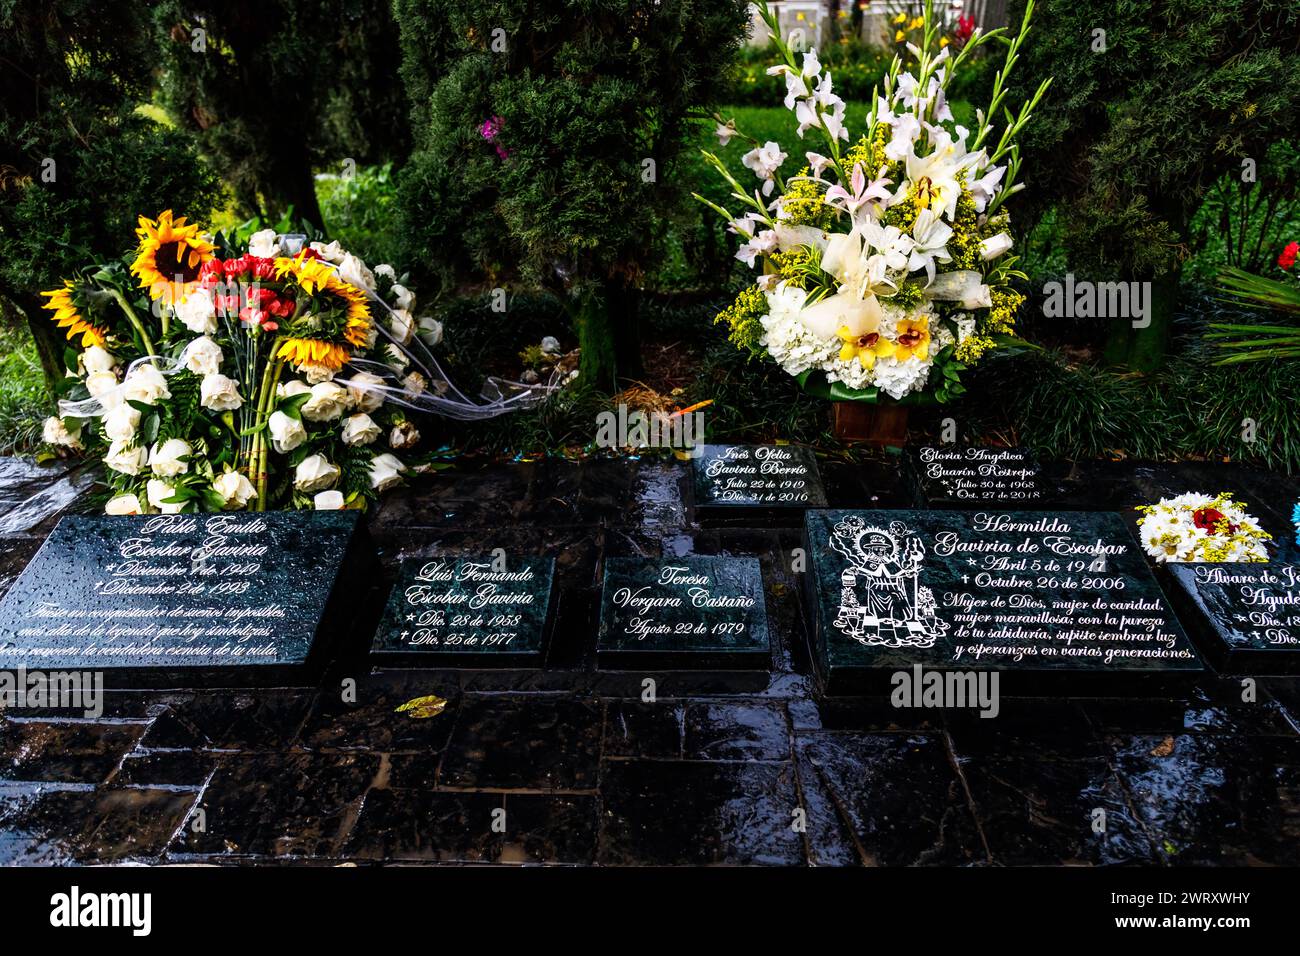 Medellin, Colombia - January 11, 2023: Grave of Pablo Escobar Gaviria next to graves of the rest of his family Stock Photo